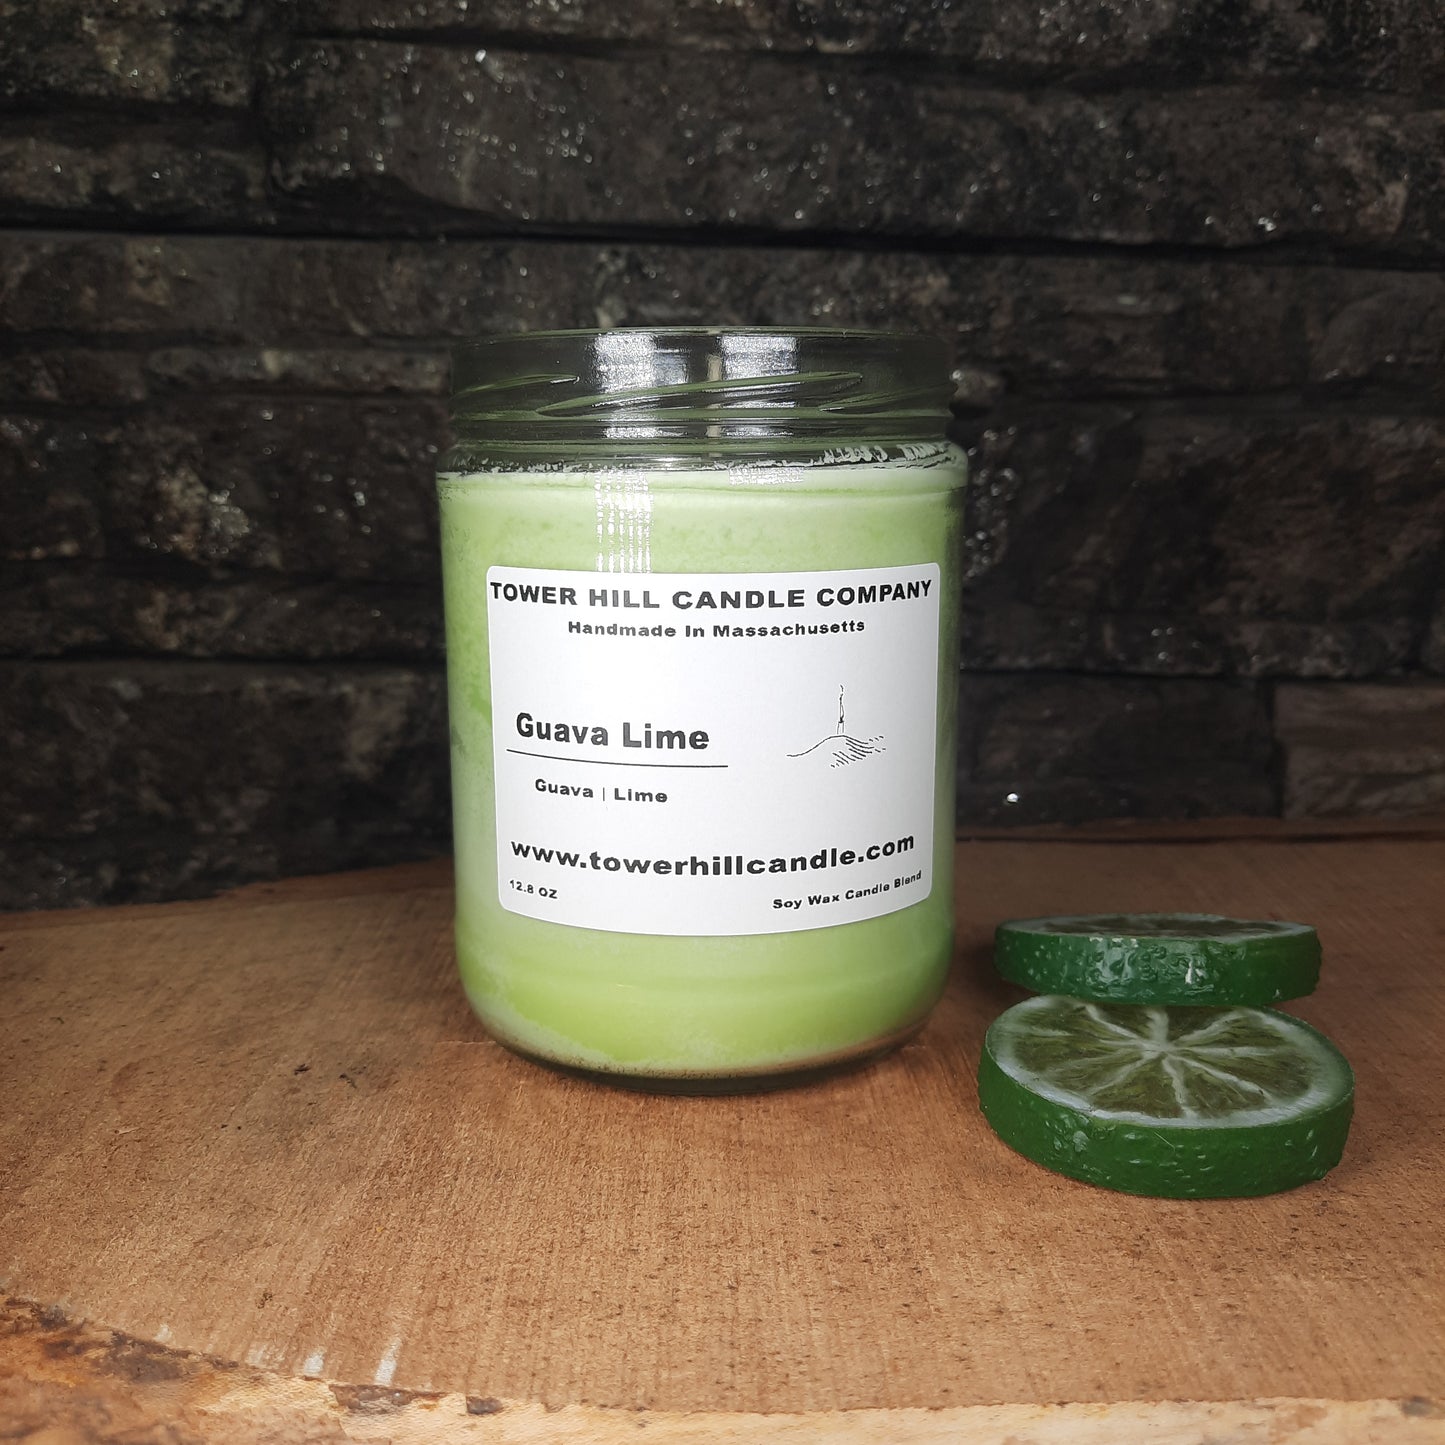 Guava Lime 12.8oz Candle